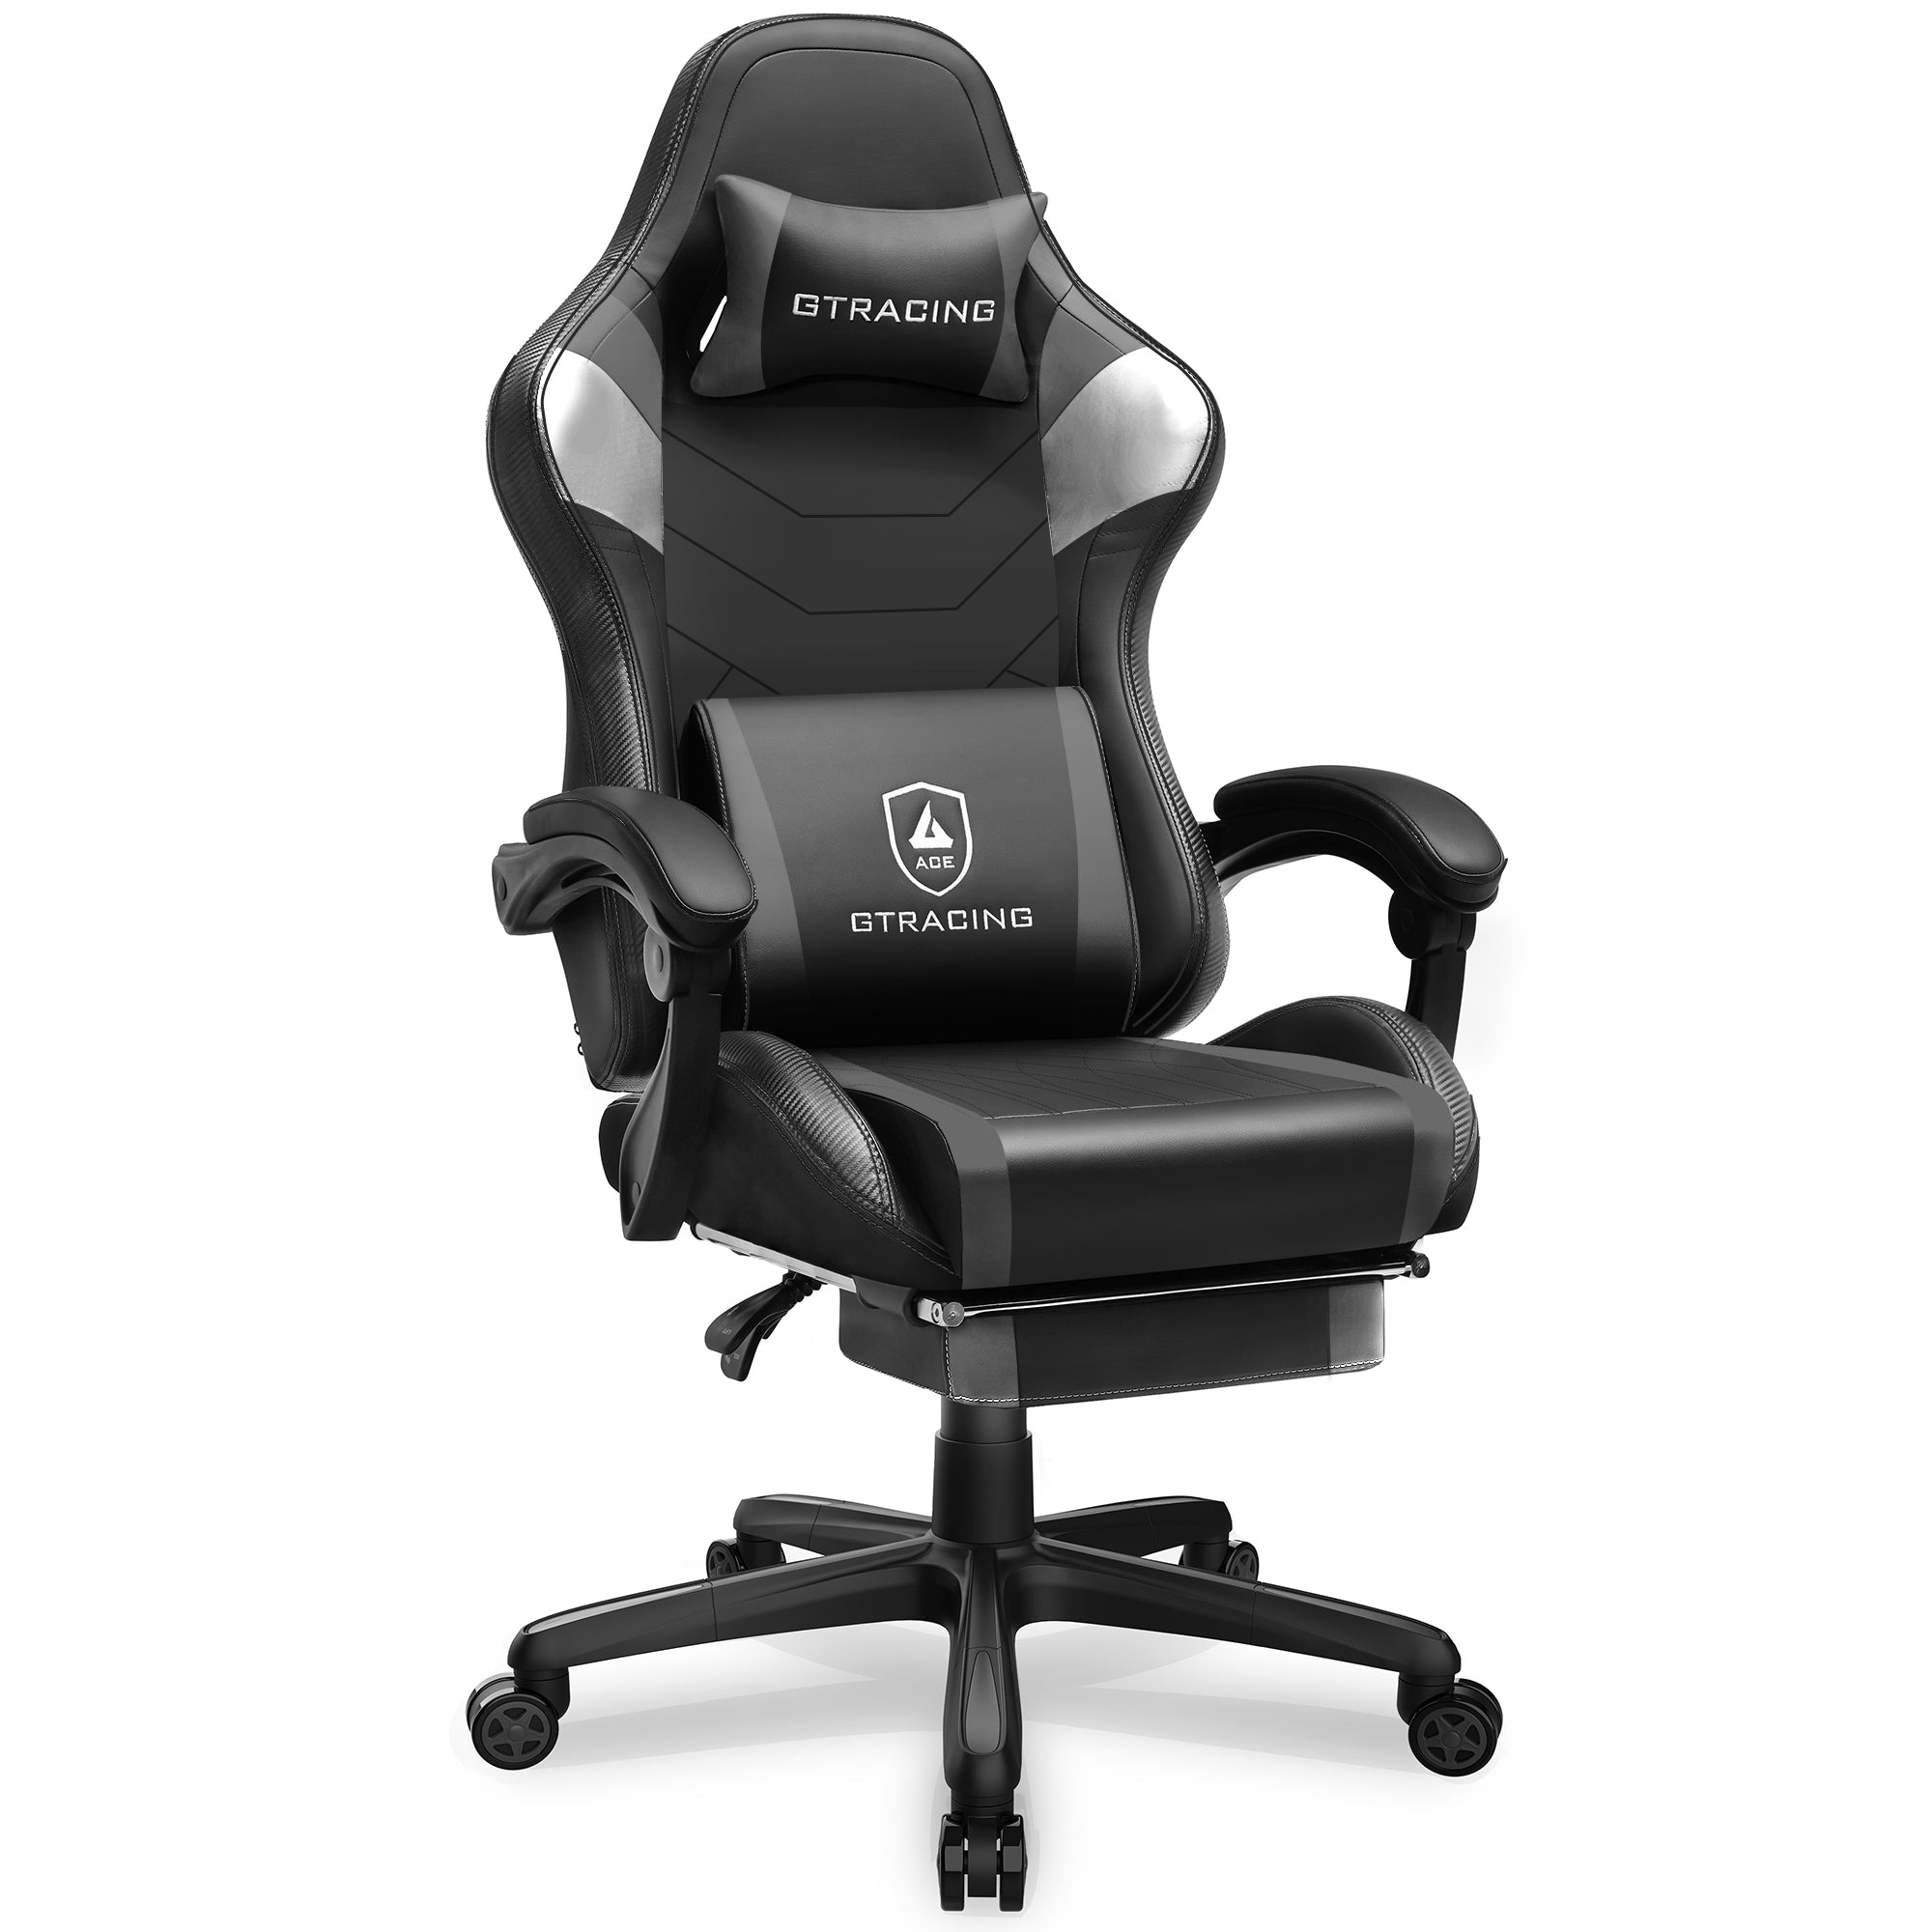 GTRACING Gaming Chair Ergonomic Computer Office Chair with Footrest and Lumbar Support WMT GT079 - GTRACING